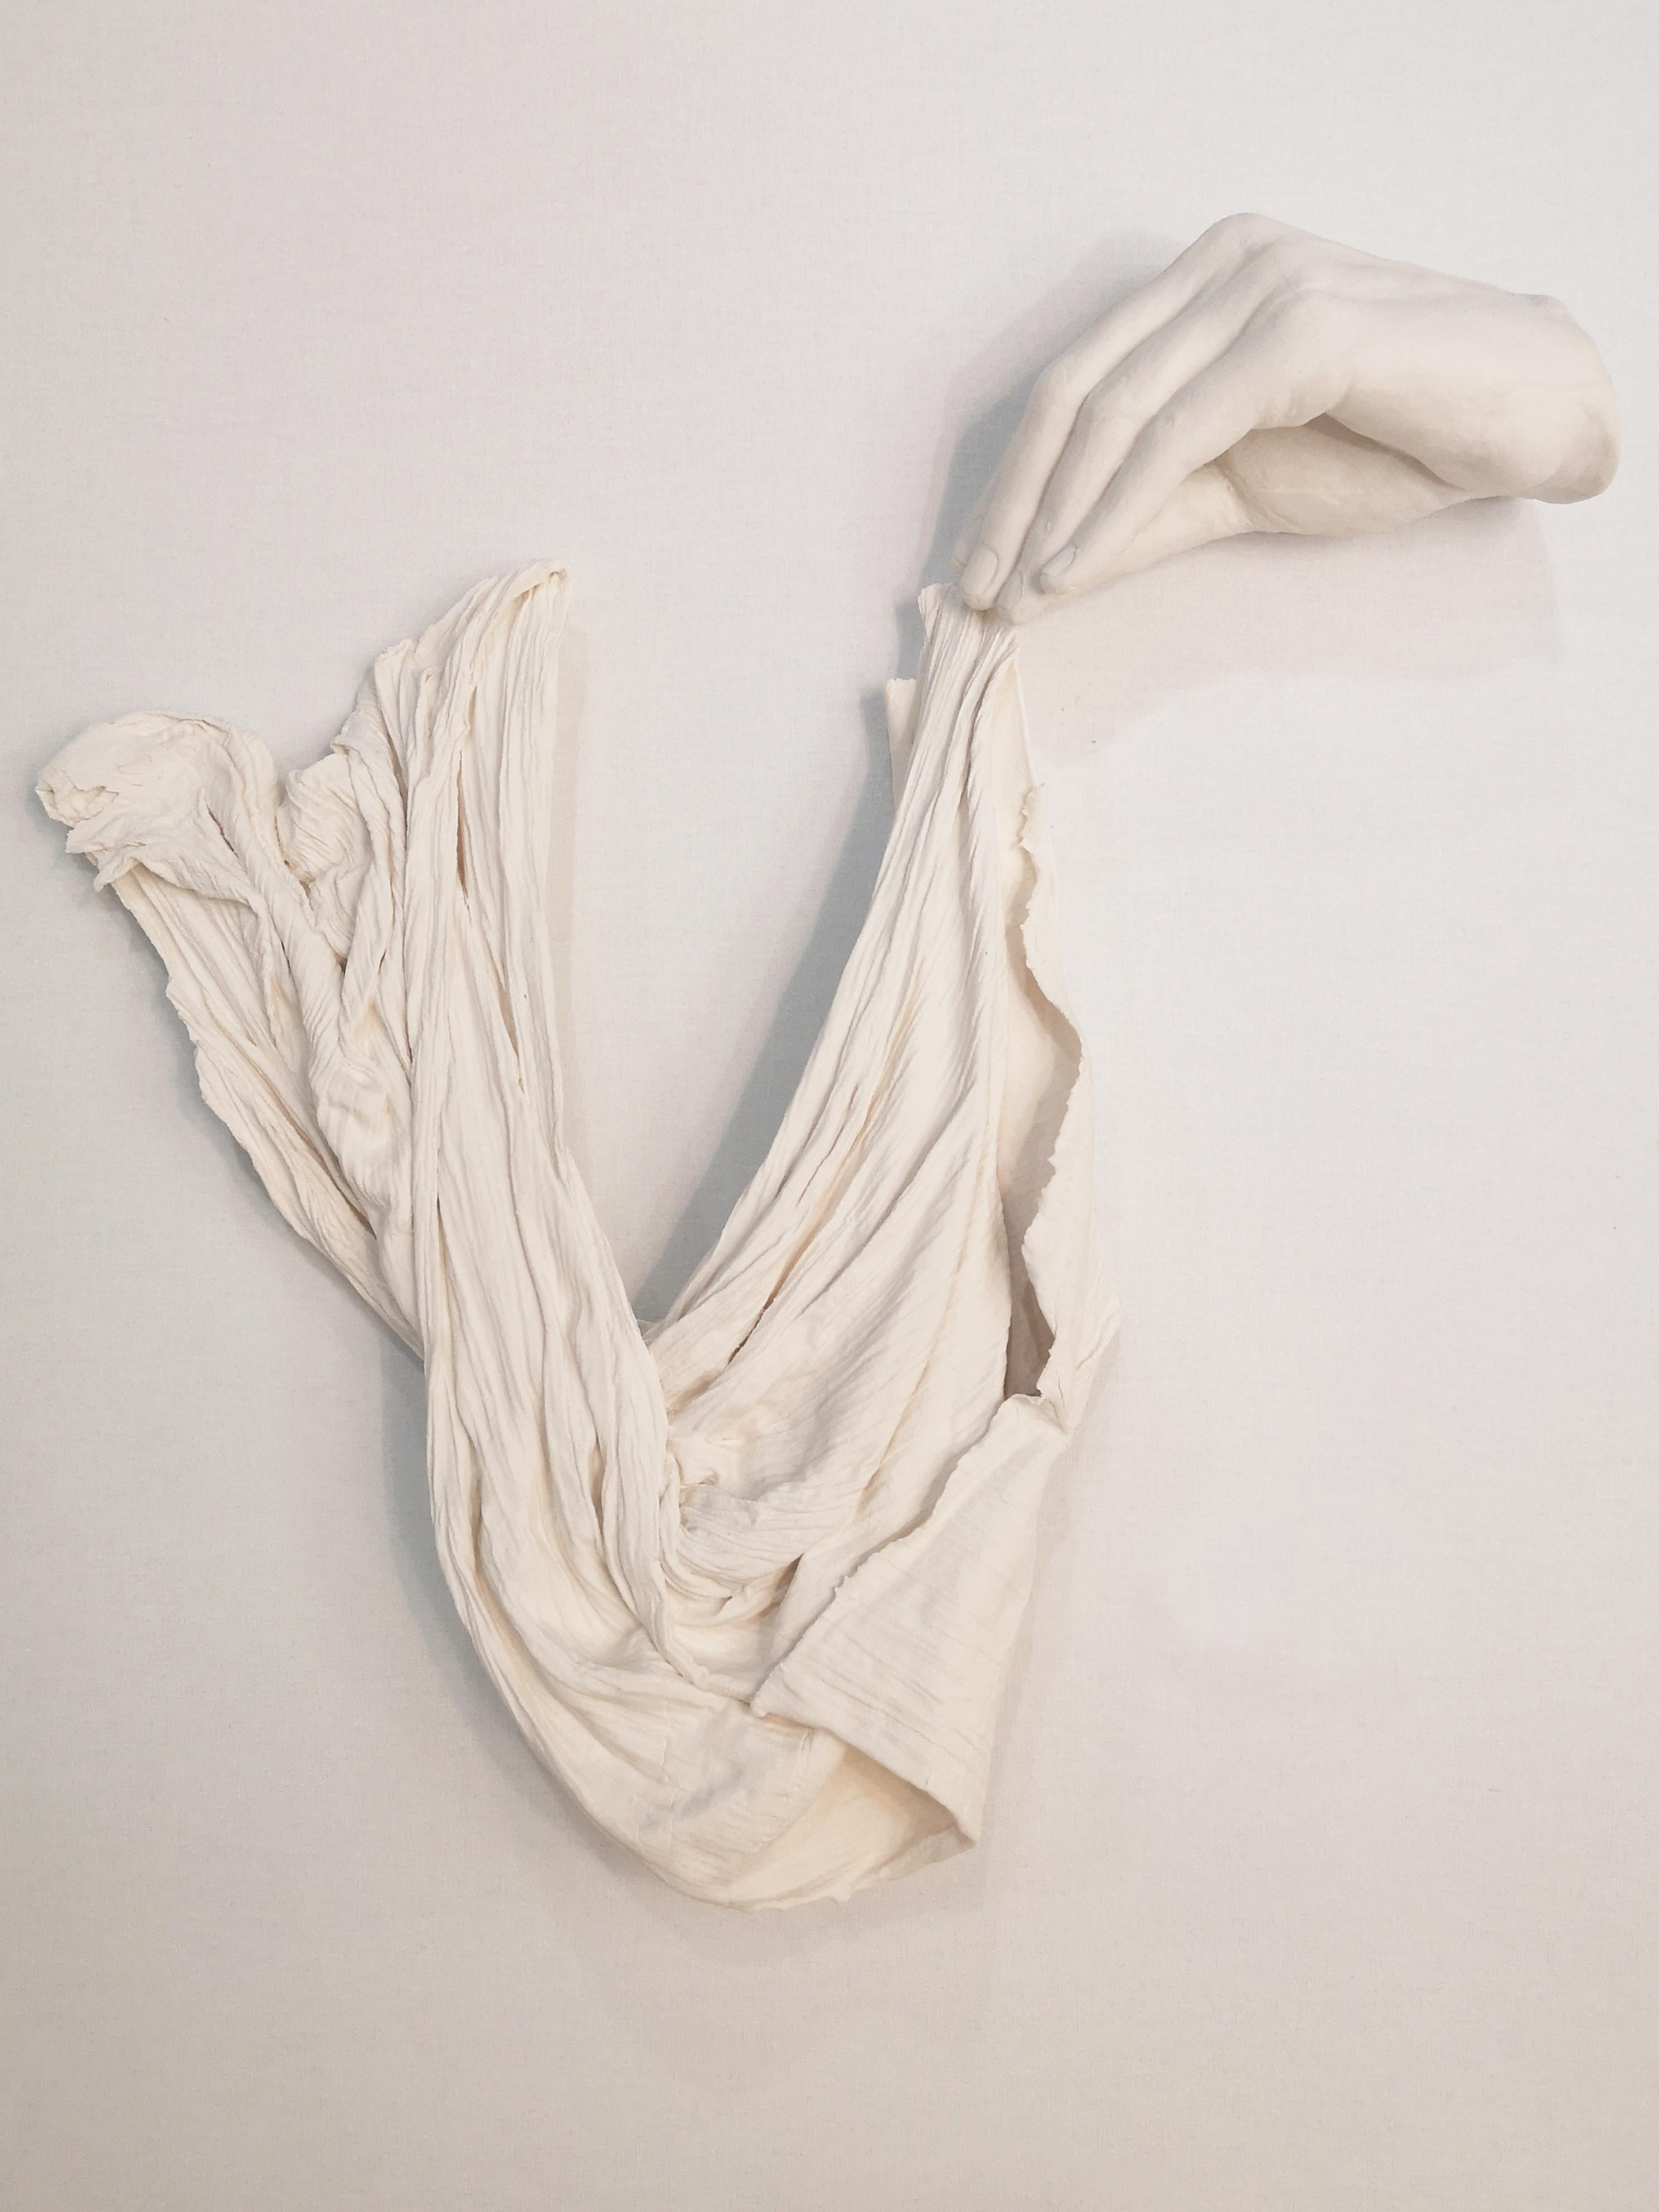 Gentle Hand Wall Sculpture by Dora Stanczel
One of a Kind.
Dimensions: D 10 x W 15 x H 45 cm.
Materials: Porcelain and metal.

I create bespoke and luxurious porcelain pieces with a careful aesthetic. Beyond the technical mastery of casting, what